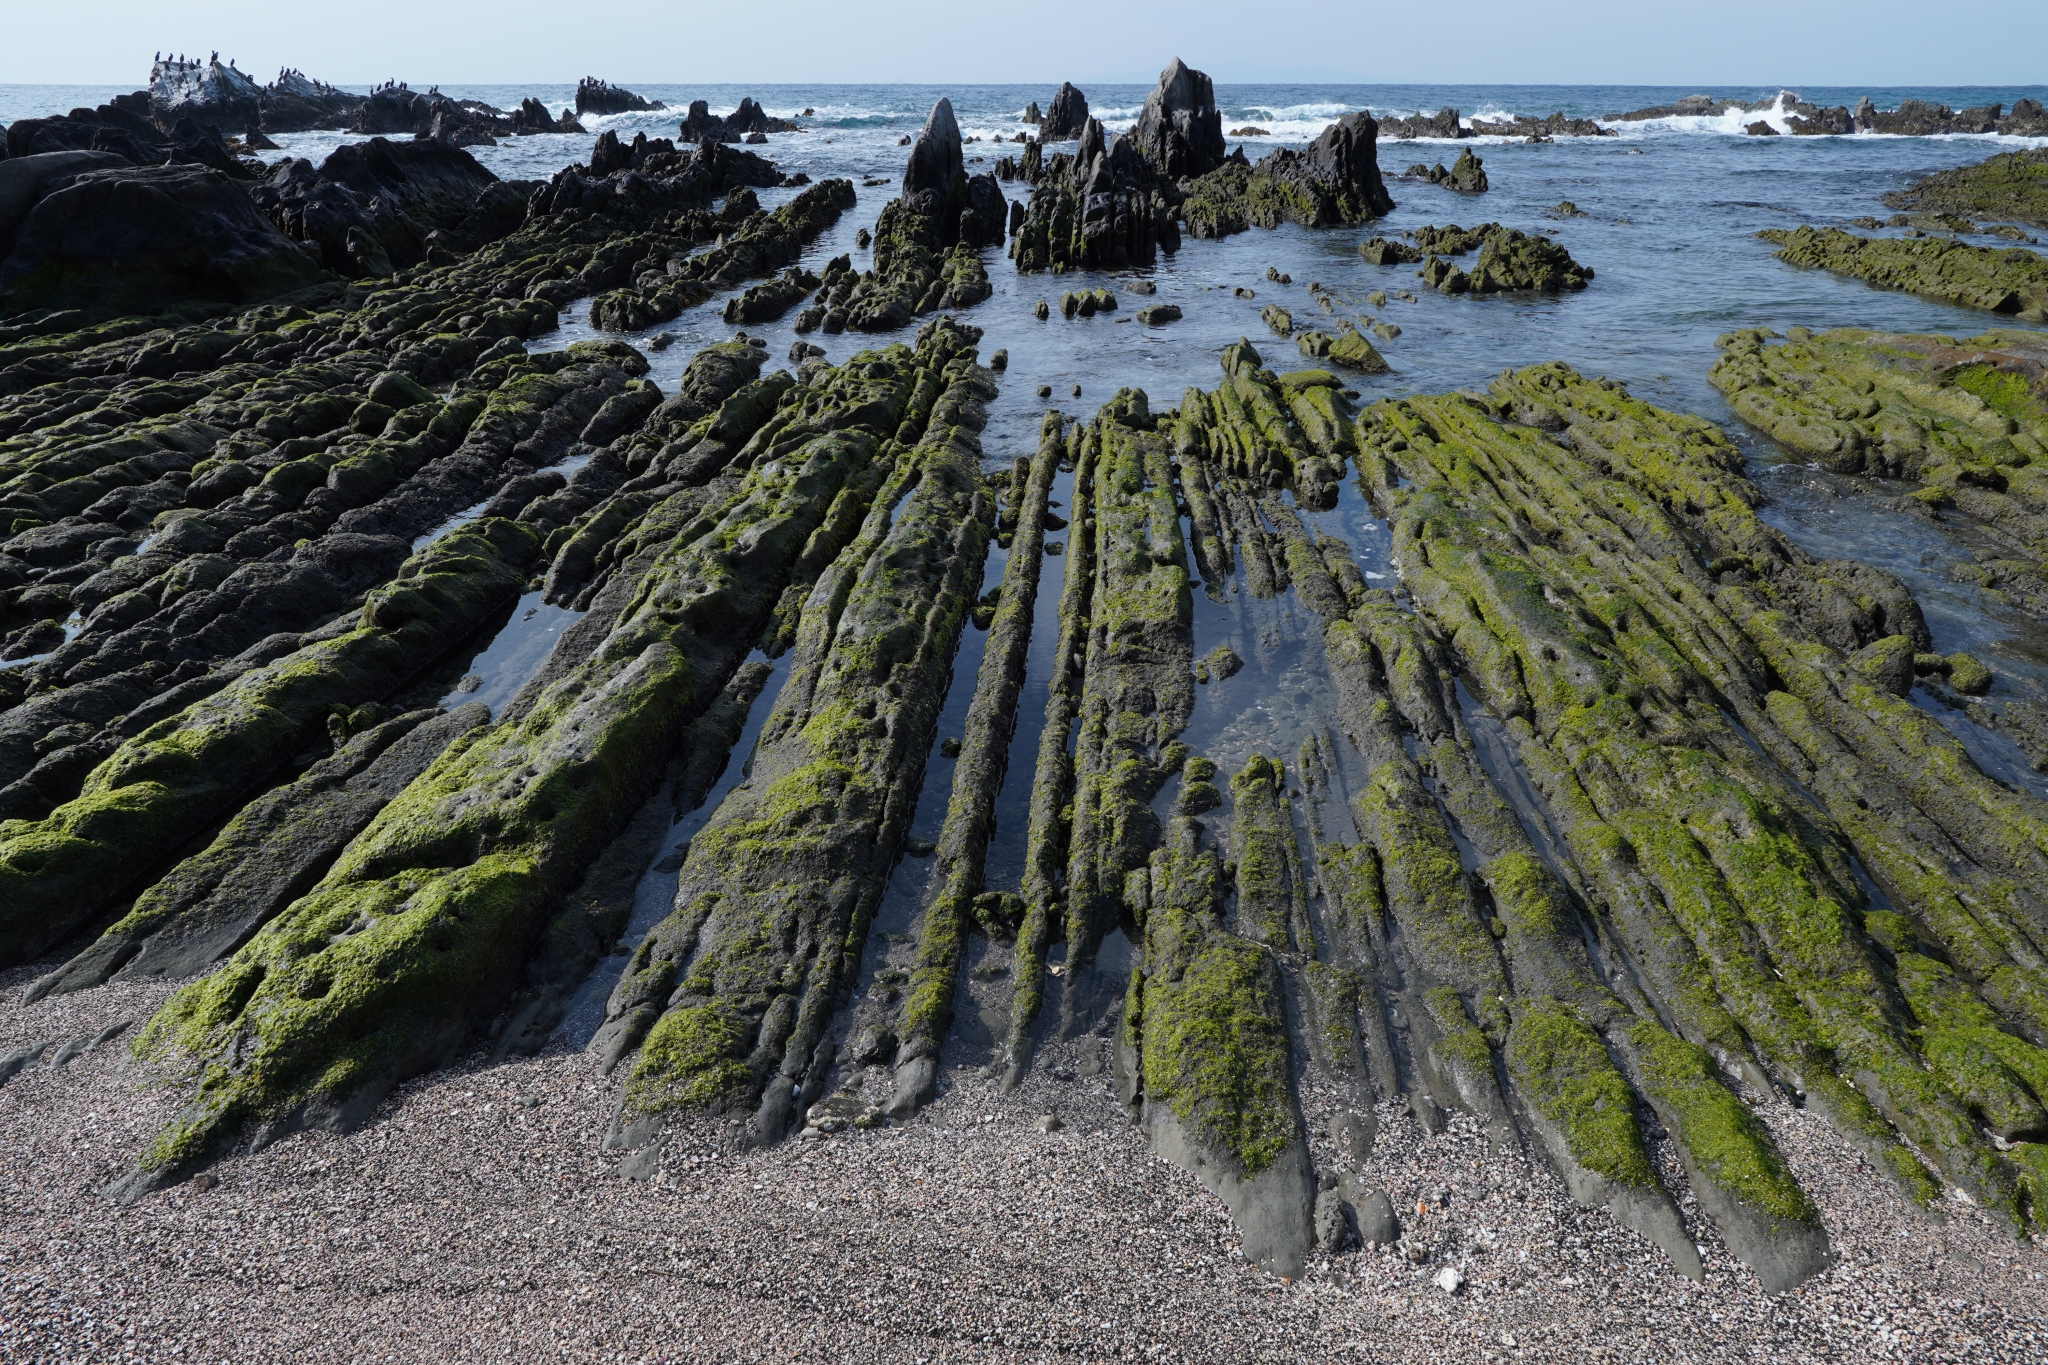 Seaweed-covered rocky ridges perpendicular to the coast